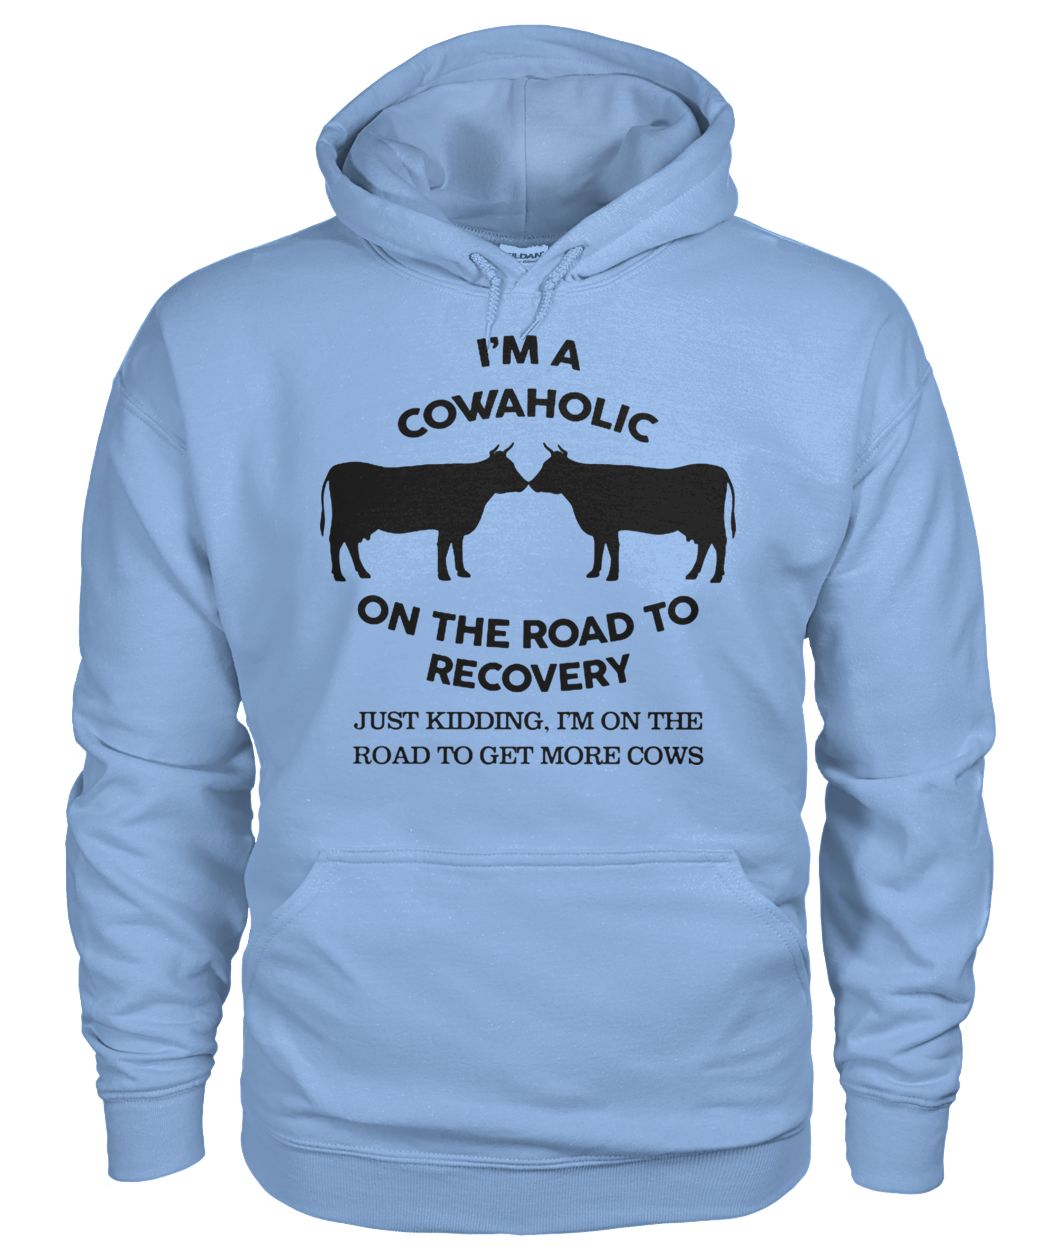 I'm a cowaholic on the road to recovery gildan hoodie